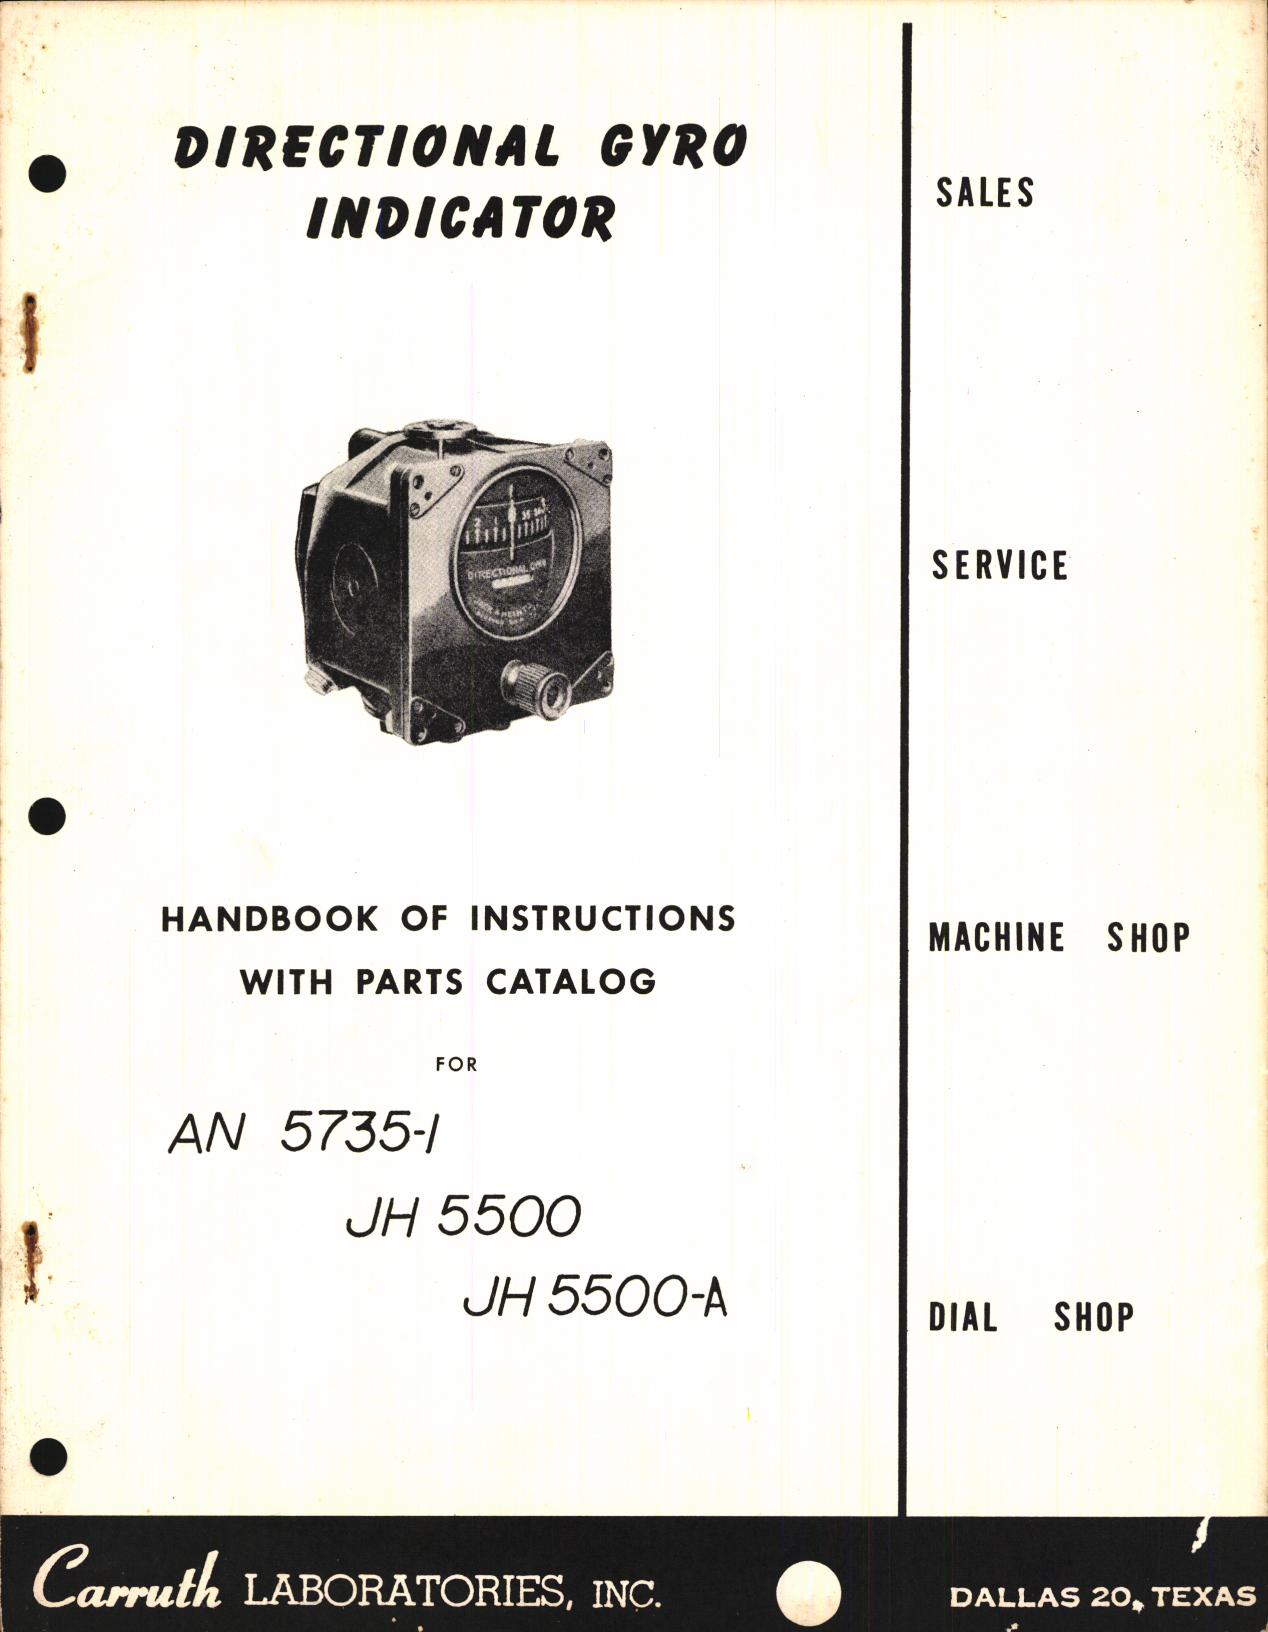 Sample page 1 from AirCorps Library document: Handbook of Instructions with Parts Catalog for Directional Gyro Indicator AN 5735-1, JH 5500 and JH 5500-A